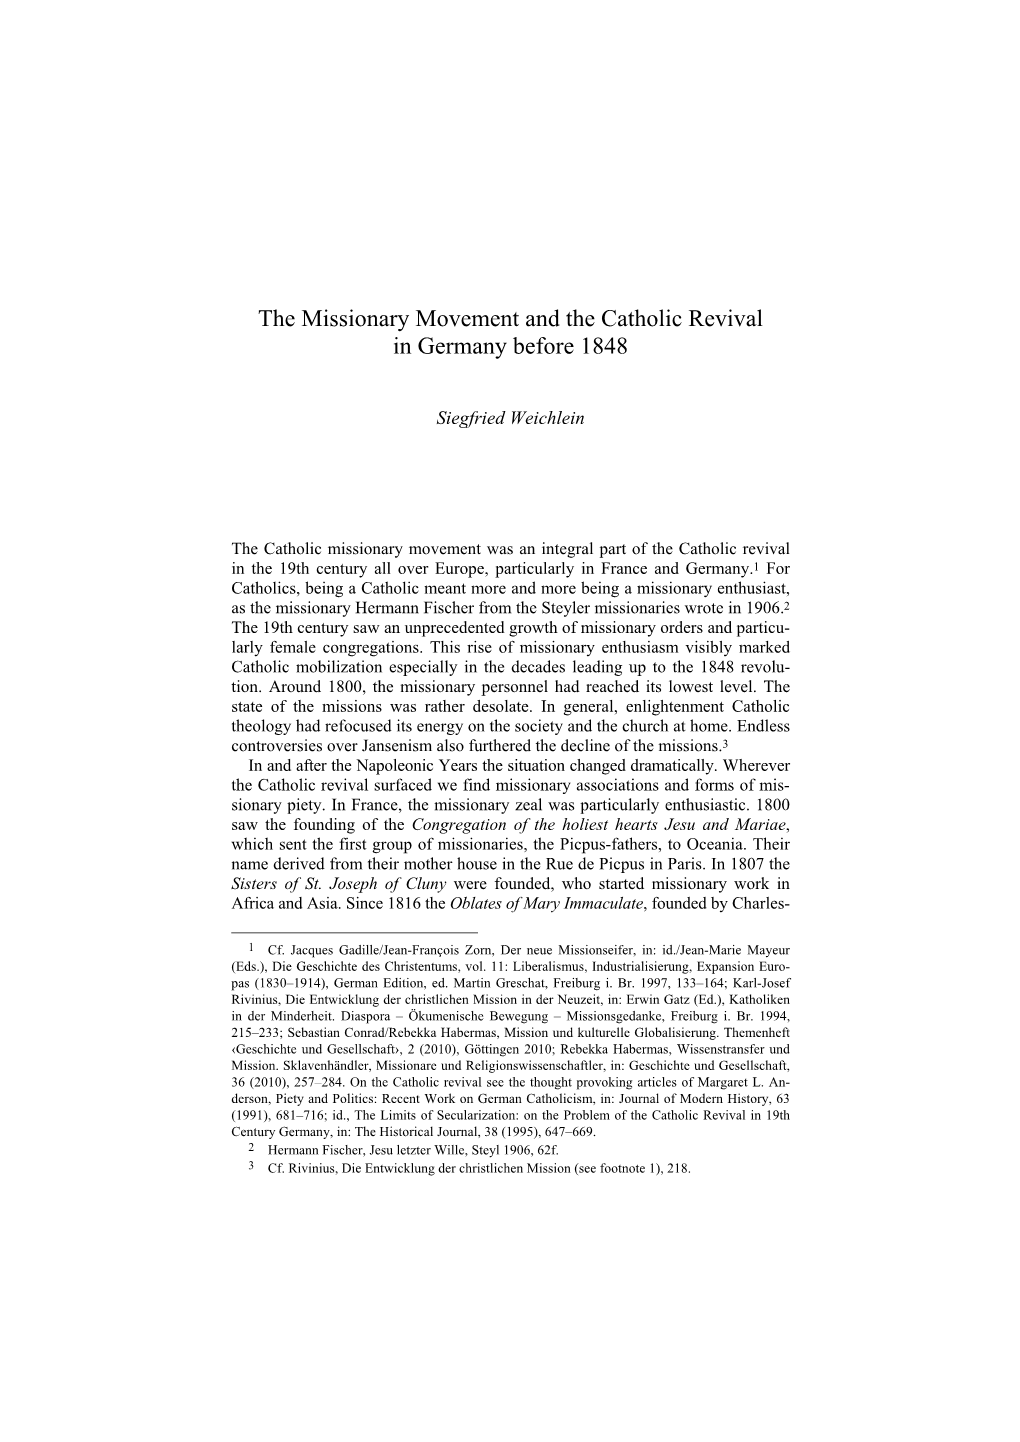 The Missionary Movement and the Catholic Revival in Germany Before 1848